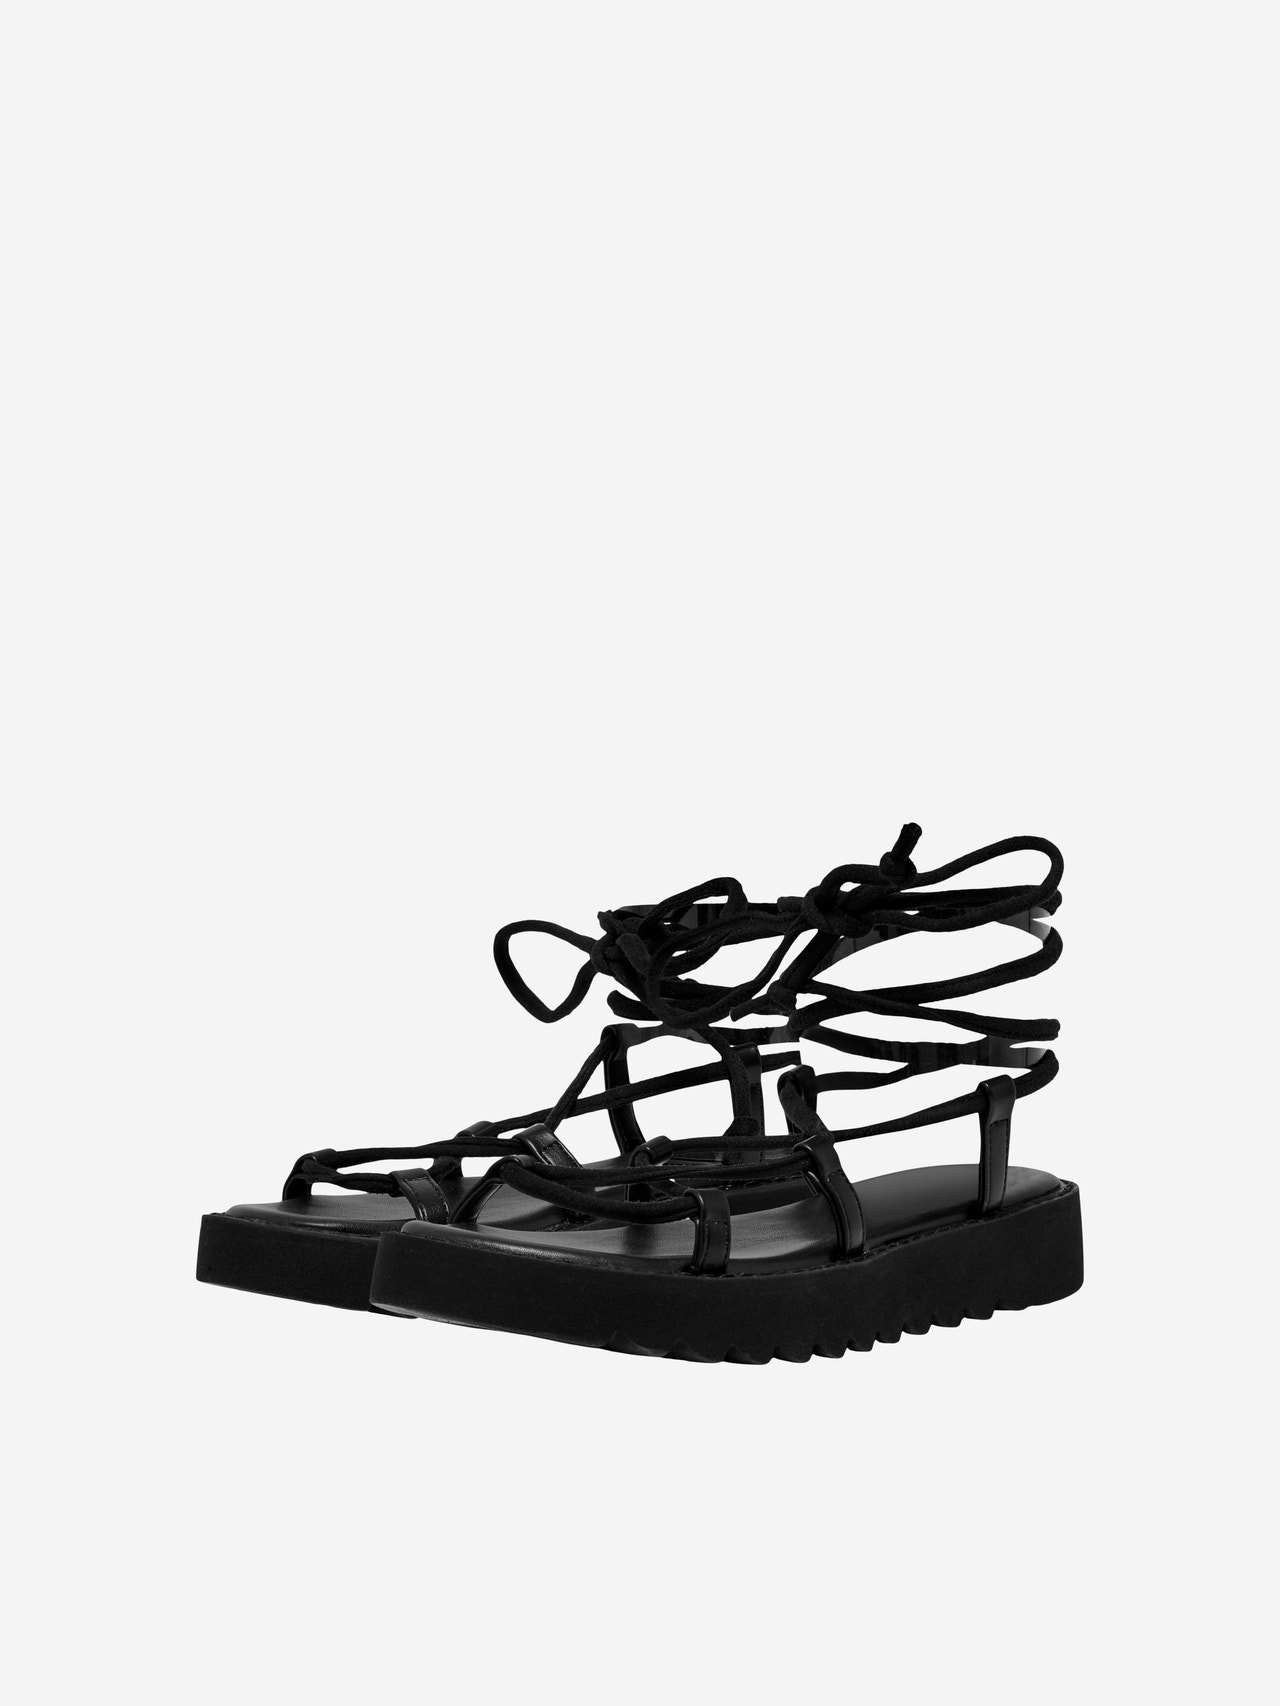 ONLY Sandals with tie string -Black - 15288055